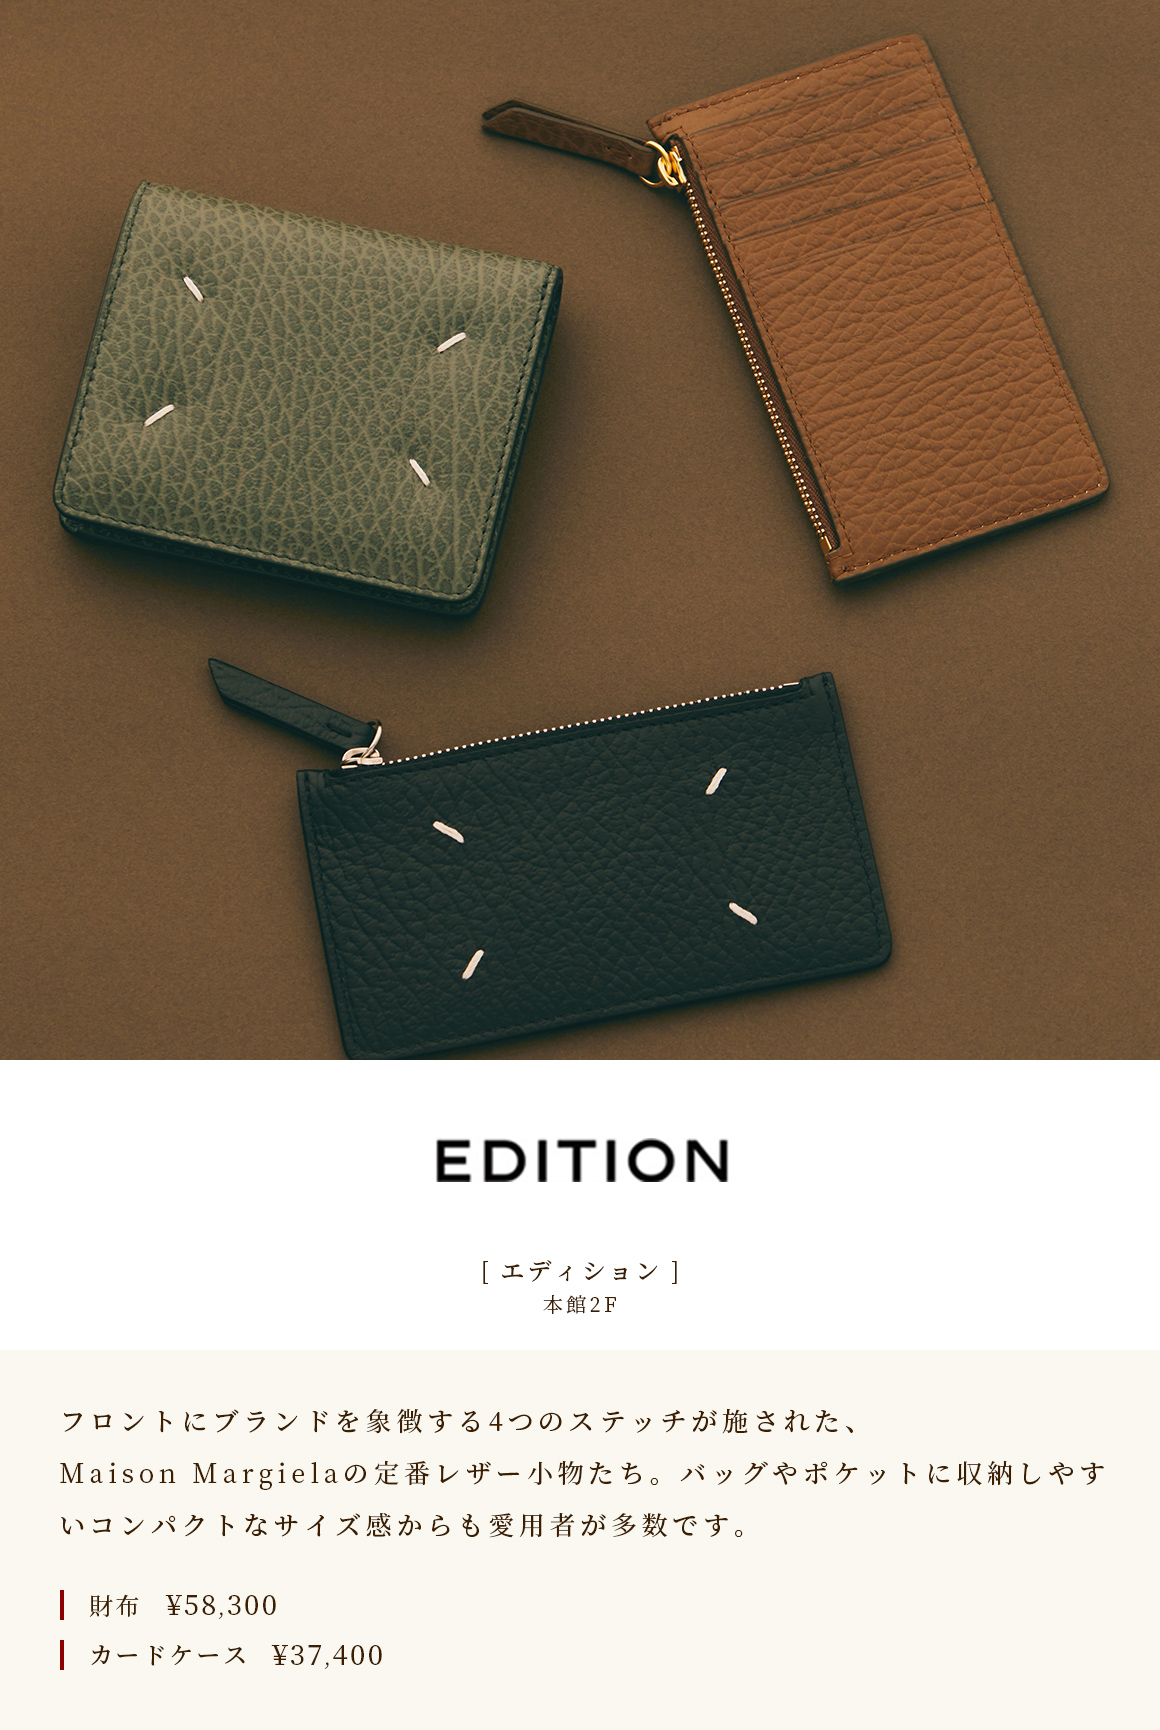 [Edition] Maison Margiela's classic leather accessories with four stitches that symbolize the brand on the 2nd floor of the Main Building. Many users also use it because of its compact size that makes it easy to store in a bag or pocket. Wallet ¥ 58,300 Card case ¥ 37,400